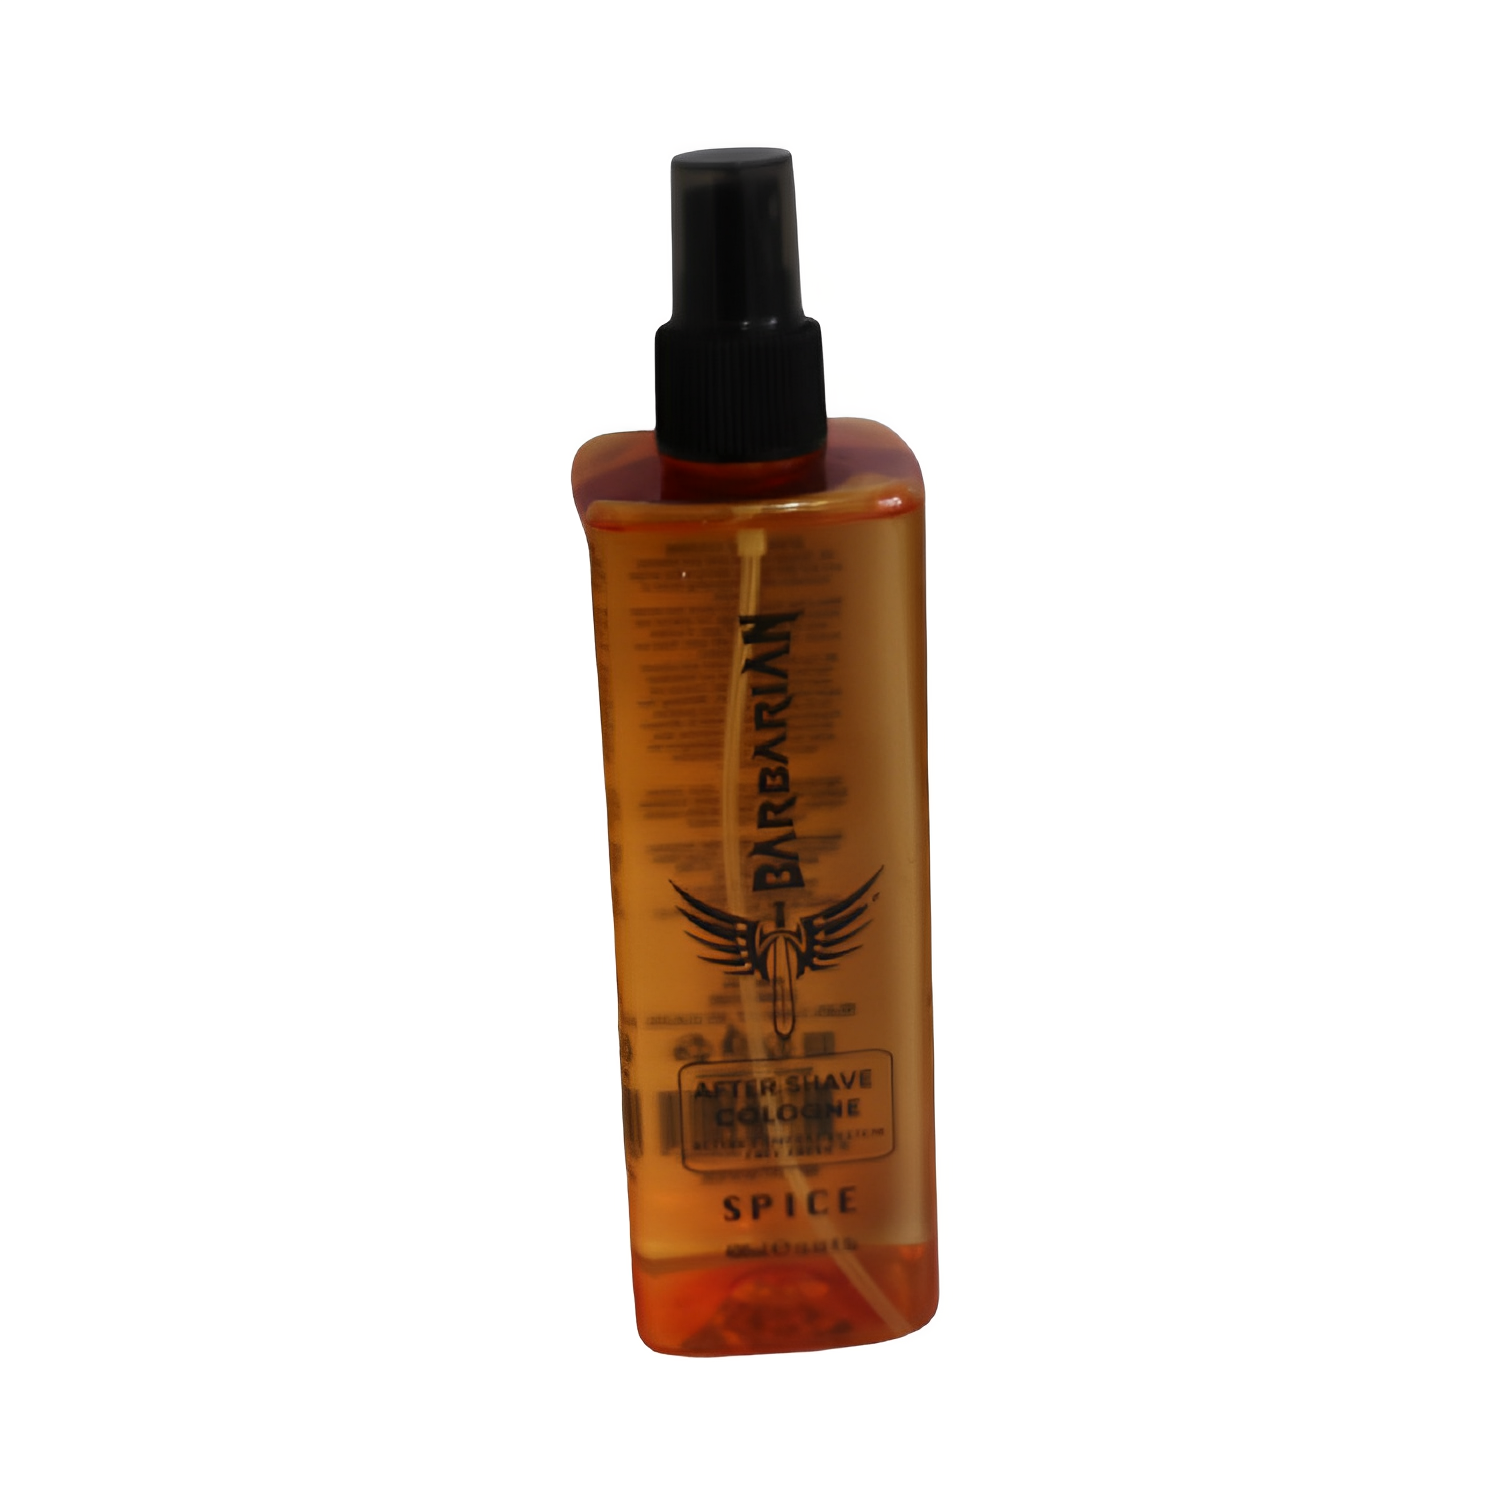 Barbarian aftershave (spice) 400ml